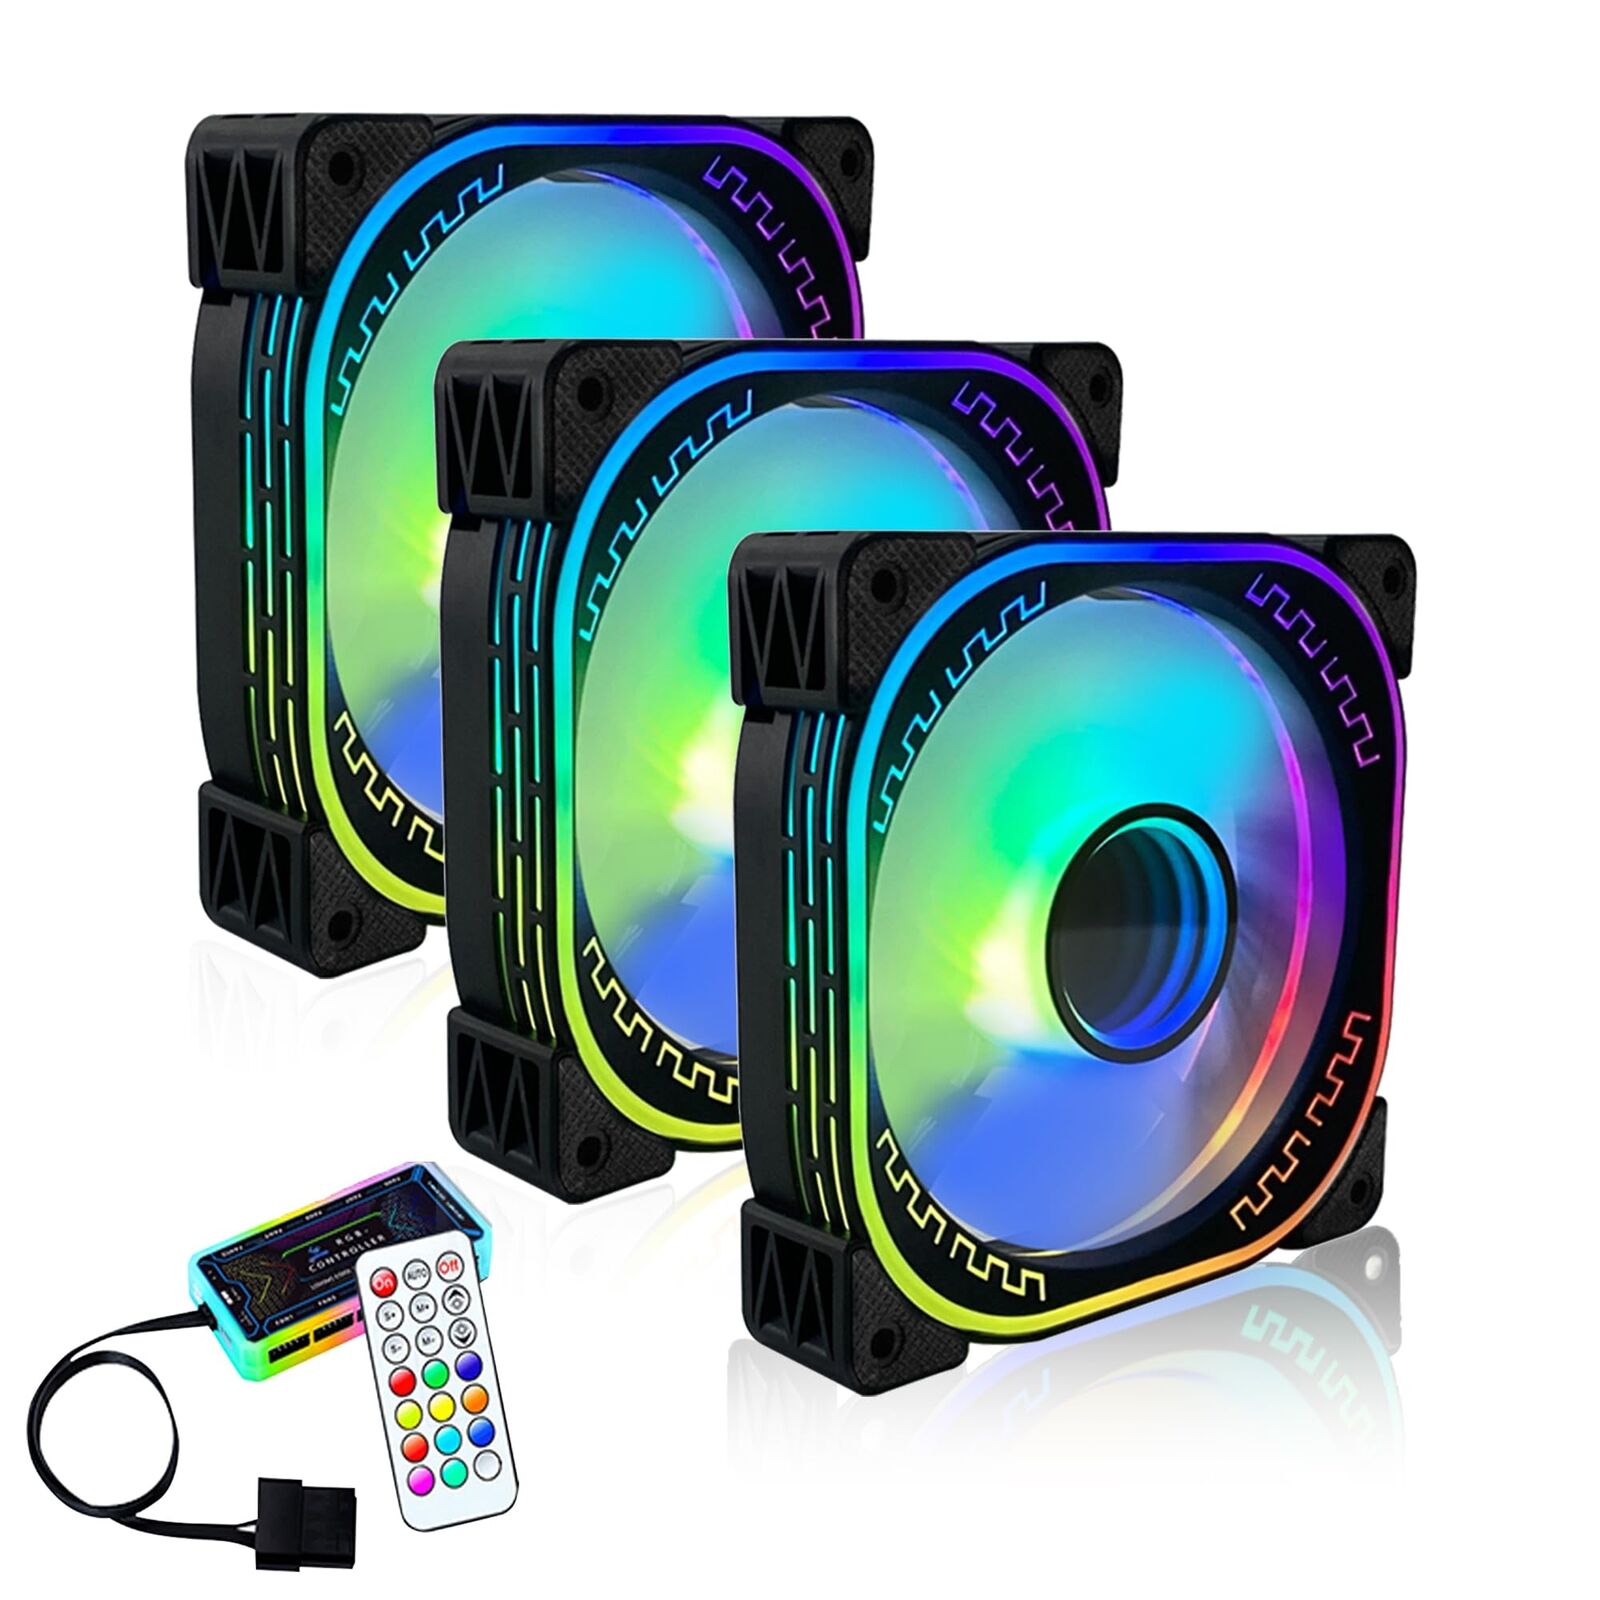 120mm RGB Case Fans 12V Quiet Gaming PC Computer LED CPU Cooler Chassis Fans ...